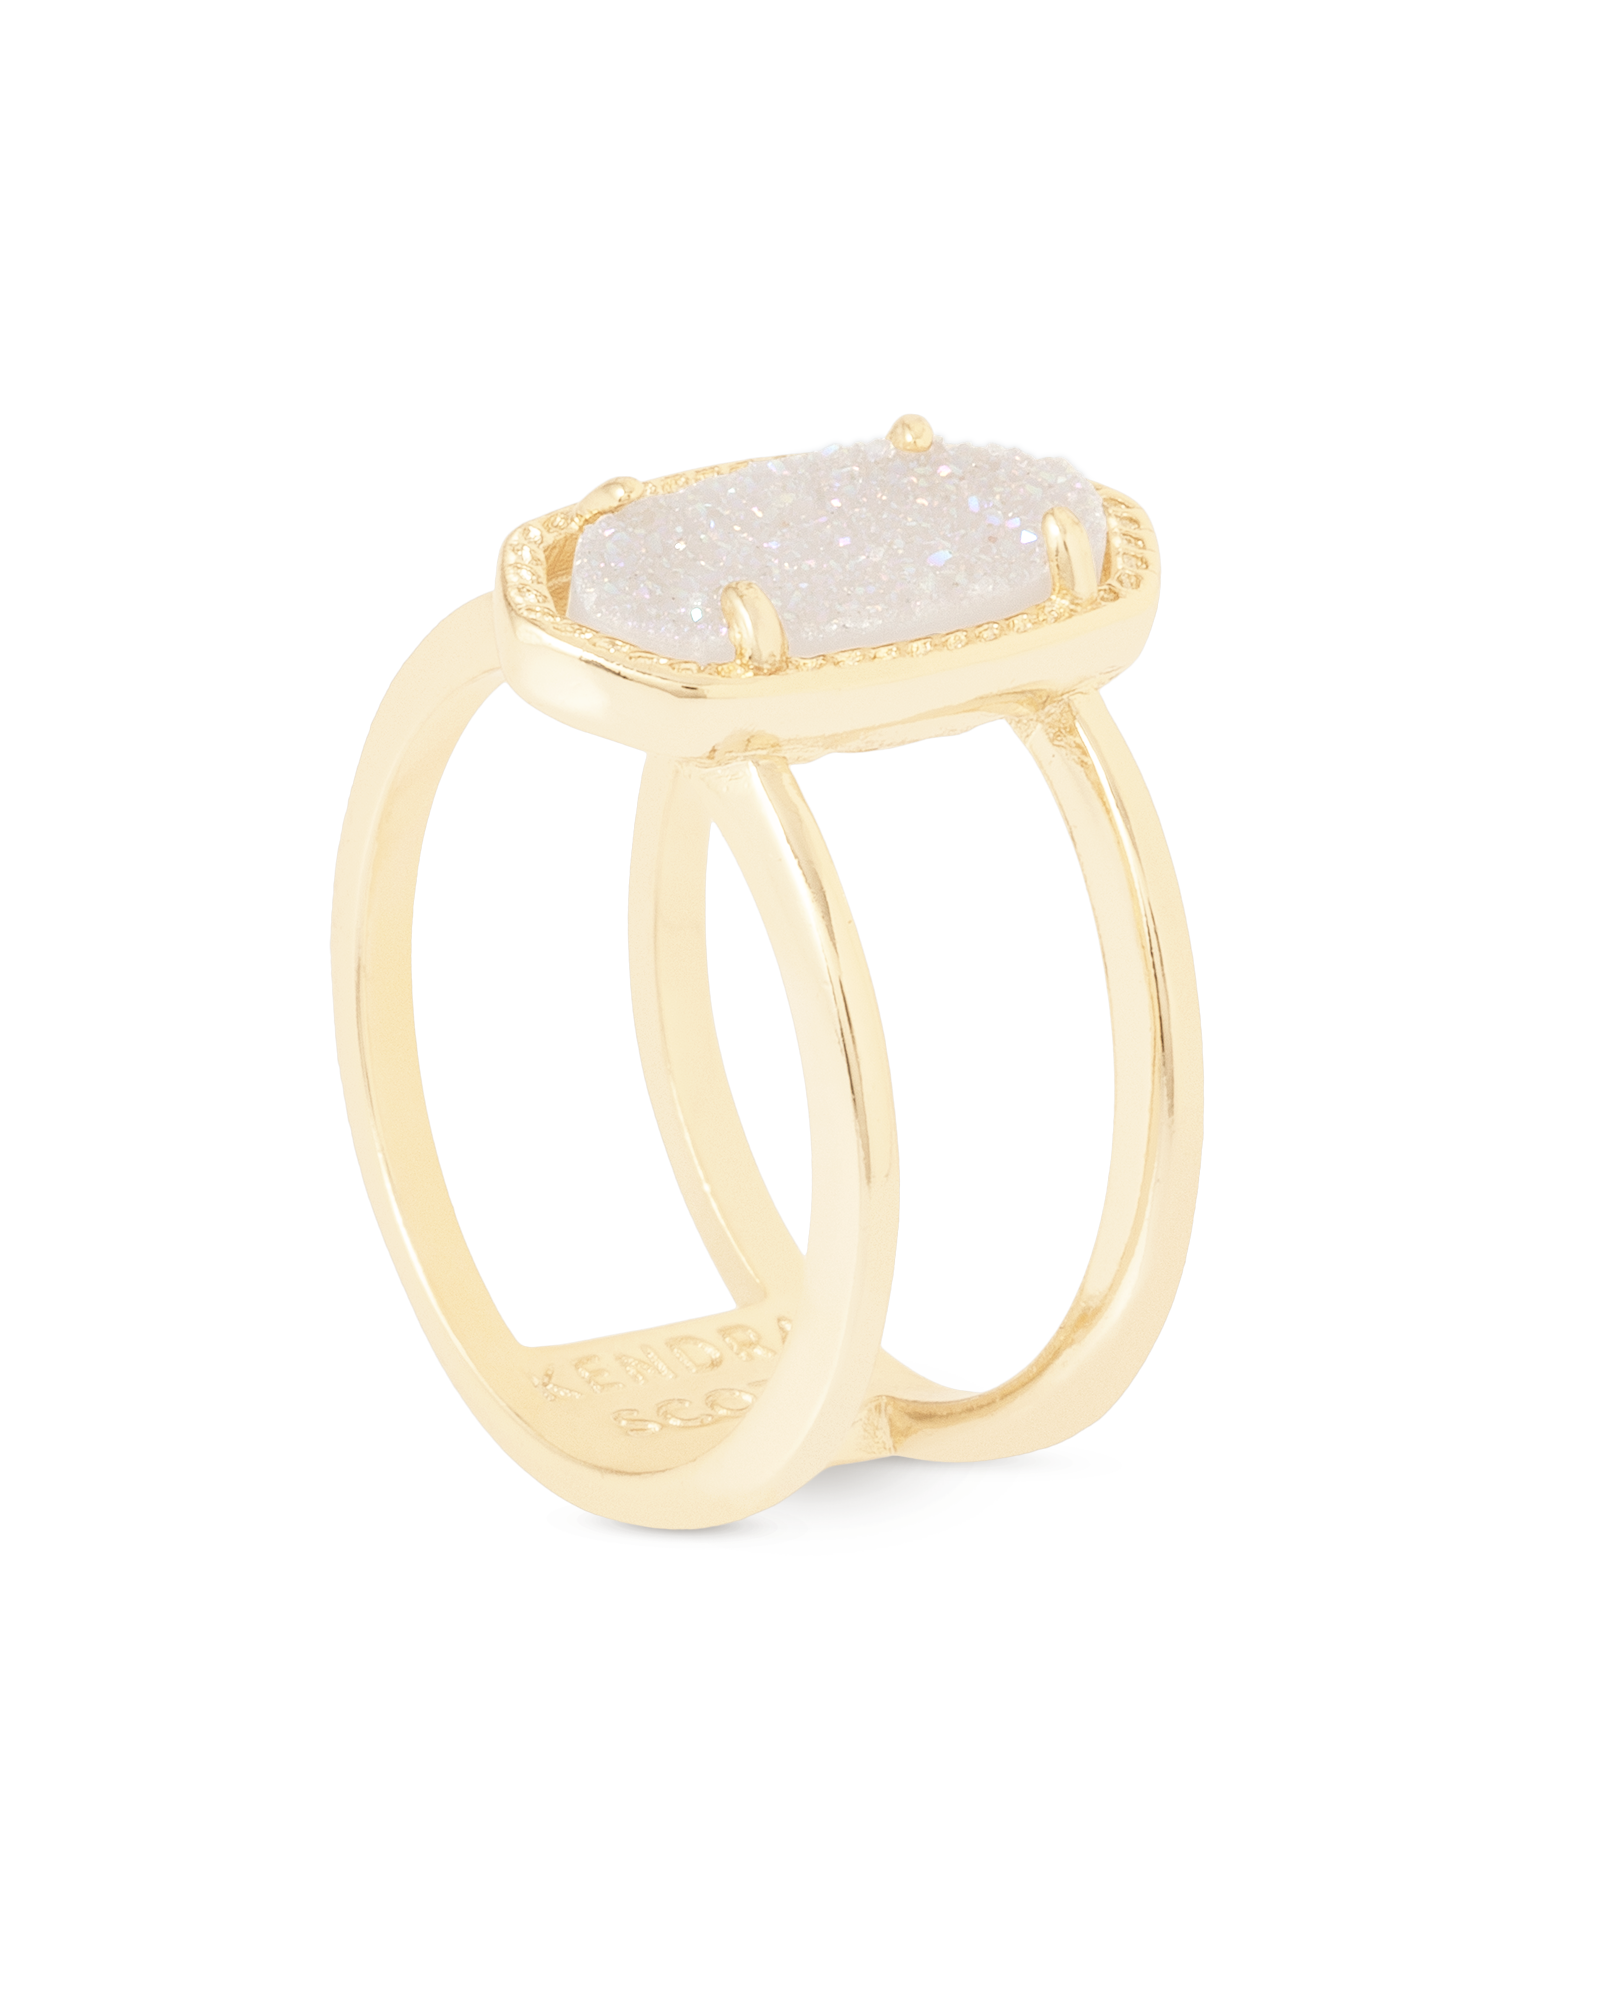 Elyse Double Band Ring in Gold Kendra Scott Jewelry